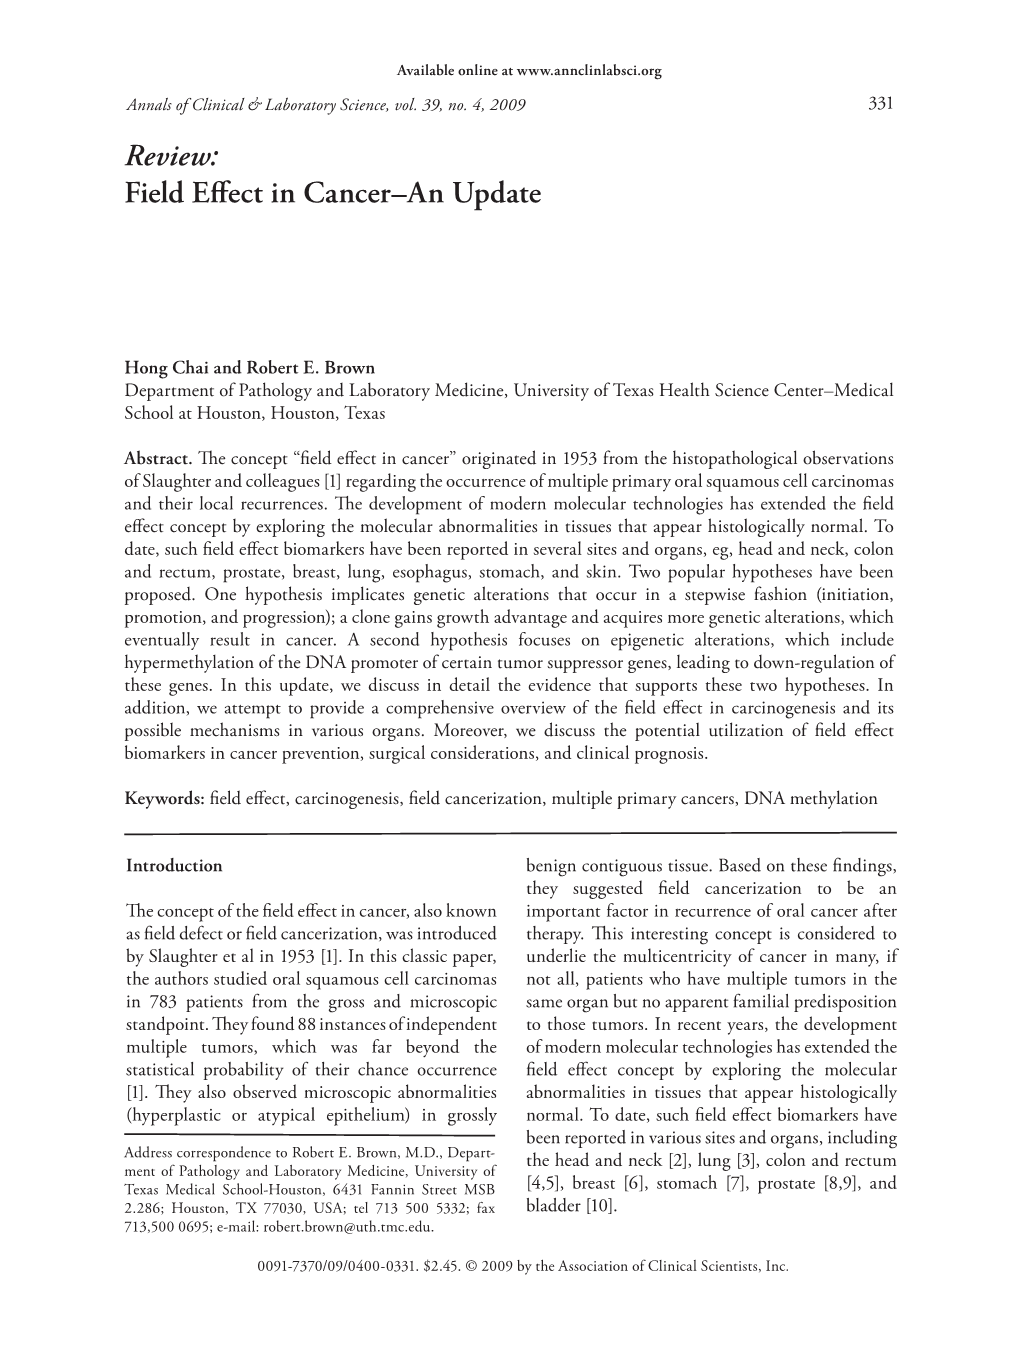 Review: Field Effect in Cancer–An Update